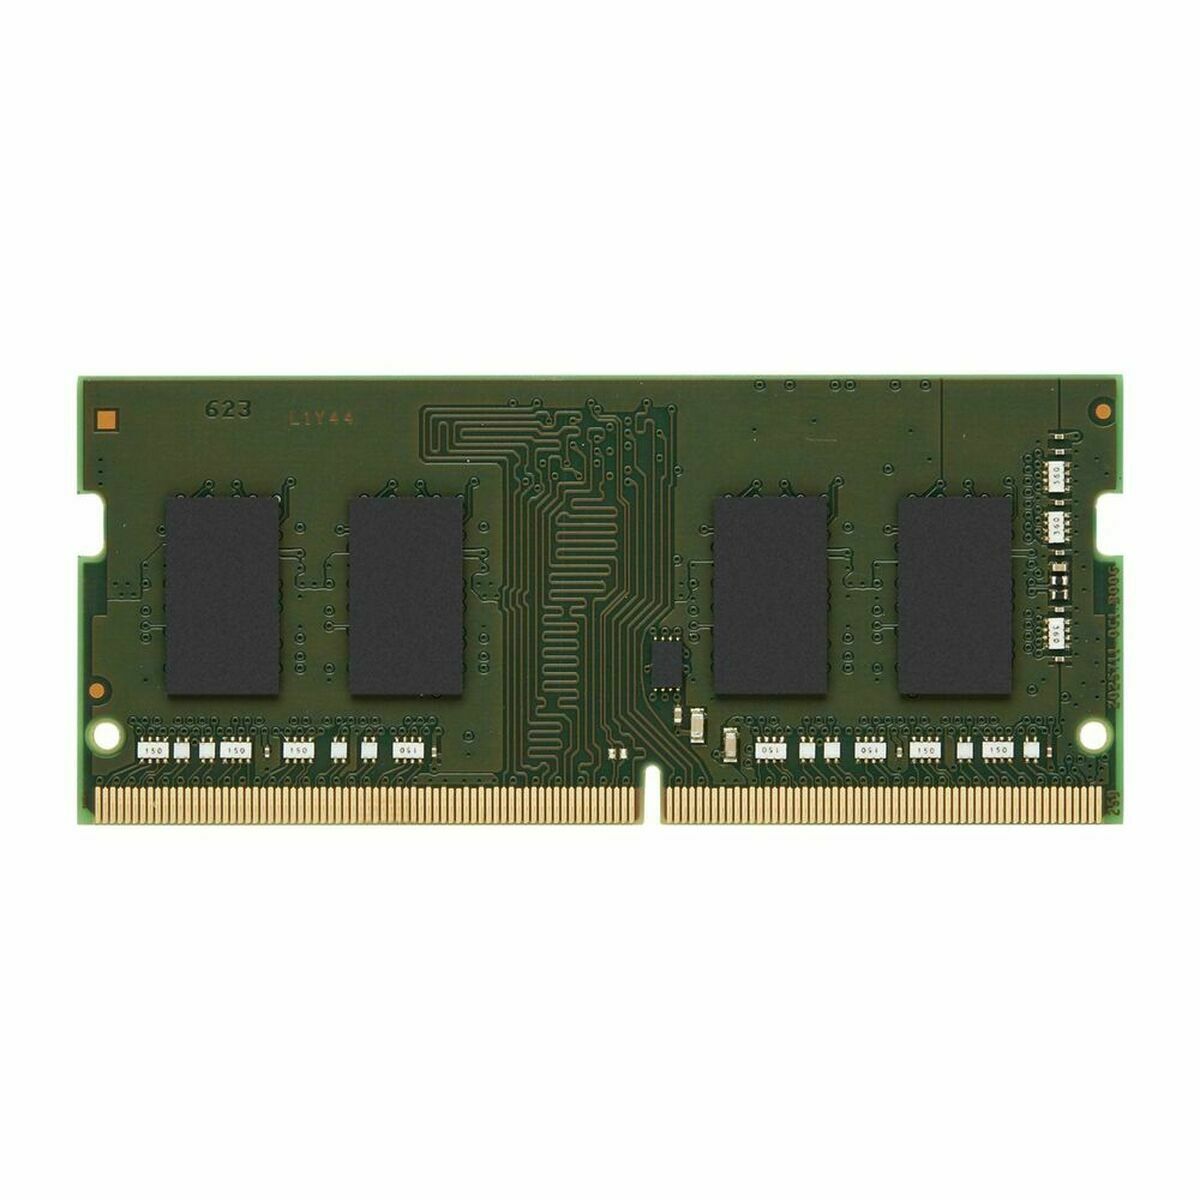 RAM Memory Silicon Power SP016GBSFU320X02 DDR4 3200 MHz CL22 16 GB, Silicon Power, Computing, Components, ram-memory-silicon-power-sp016gbsfu320x02-ddr4-3200-mhz-cl22-16-gb, Brand_Silicon Power, category-reference-2609, category-reference-2803, category-reference-2807, category-reference-t-19685, category-reference-t-19912, category-reference-t-21360, computers / components, Condition_NEW, Price_50 - 100, Teleworking, RiotNook